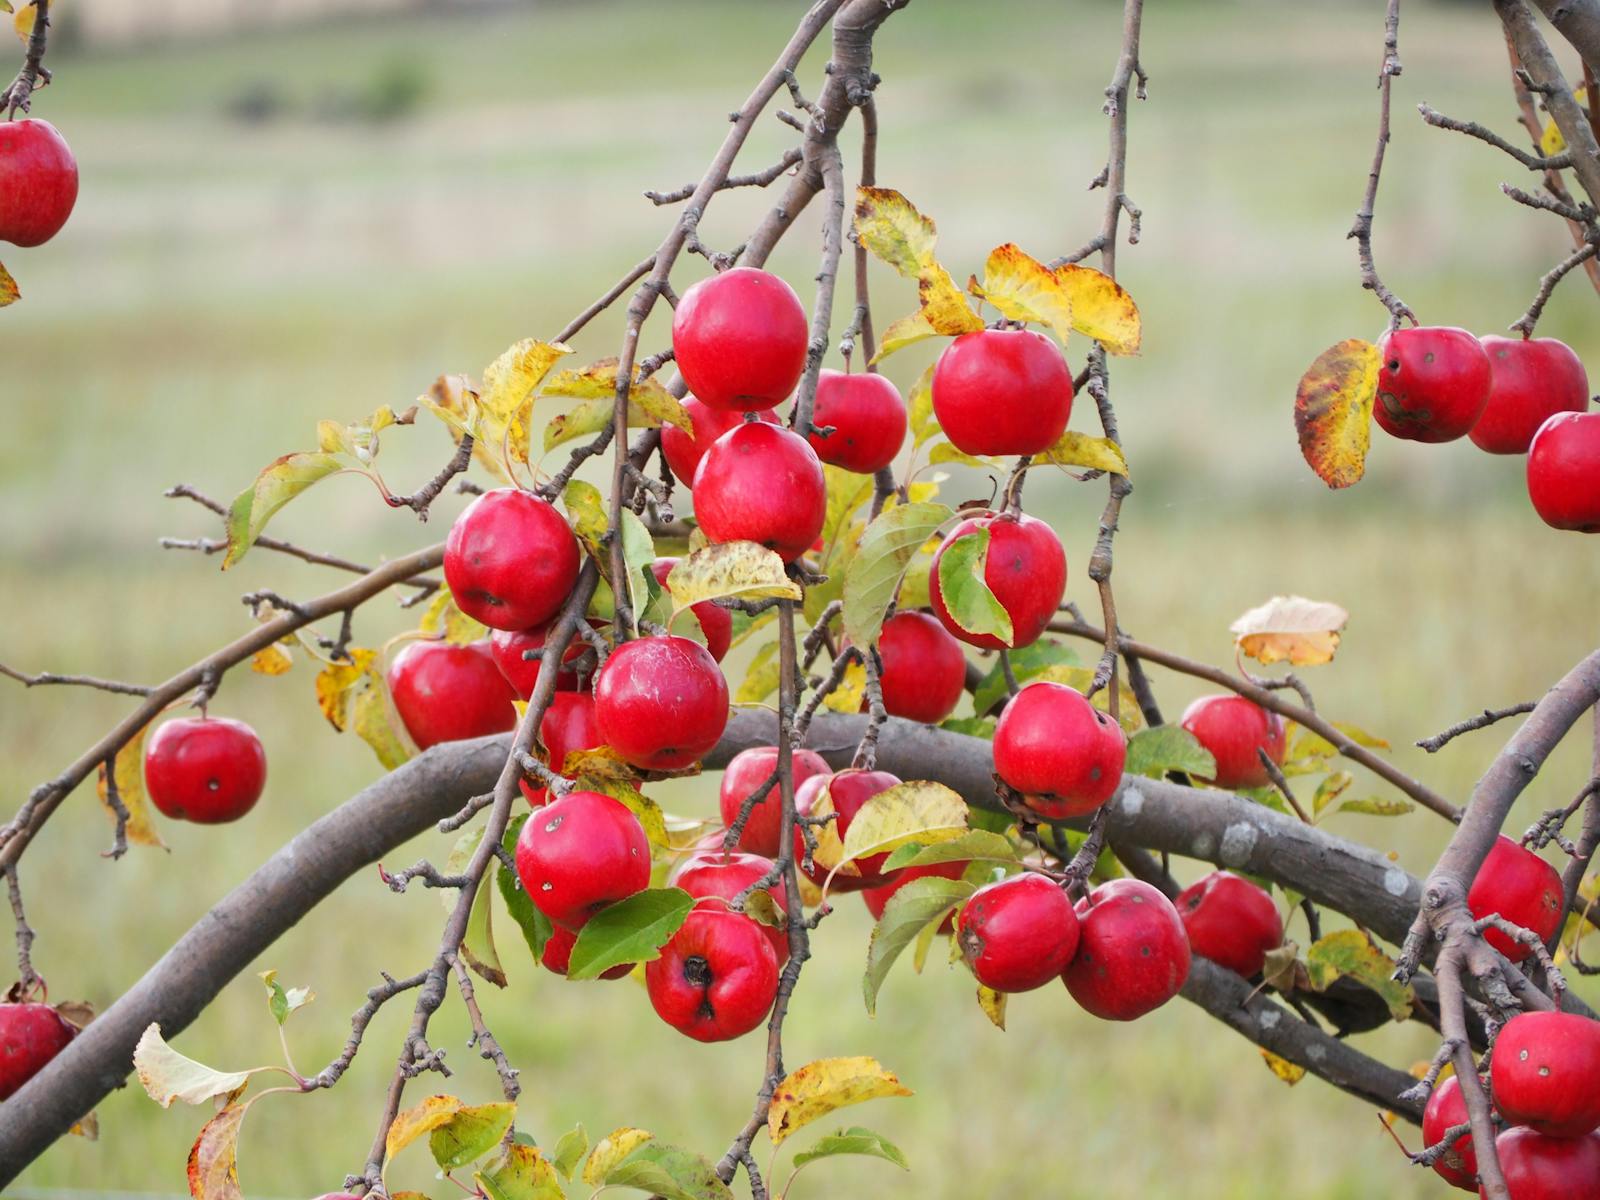 Explore the Huon Valley region with Adventure Trails Tasmania and discover the freshest apples